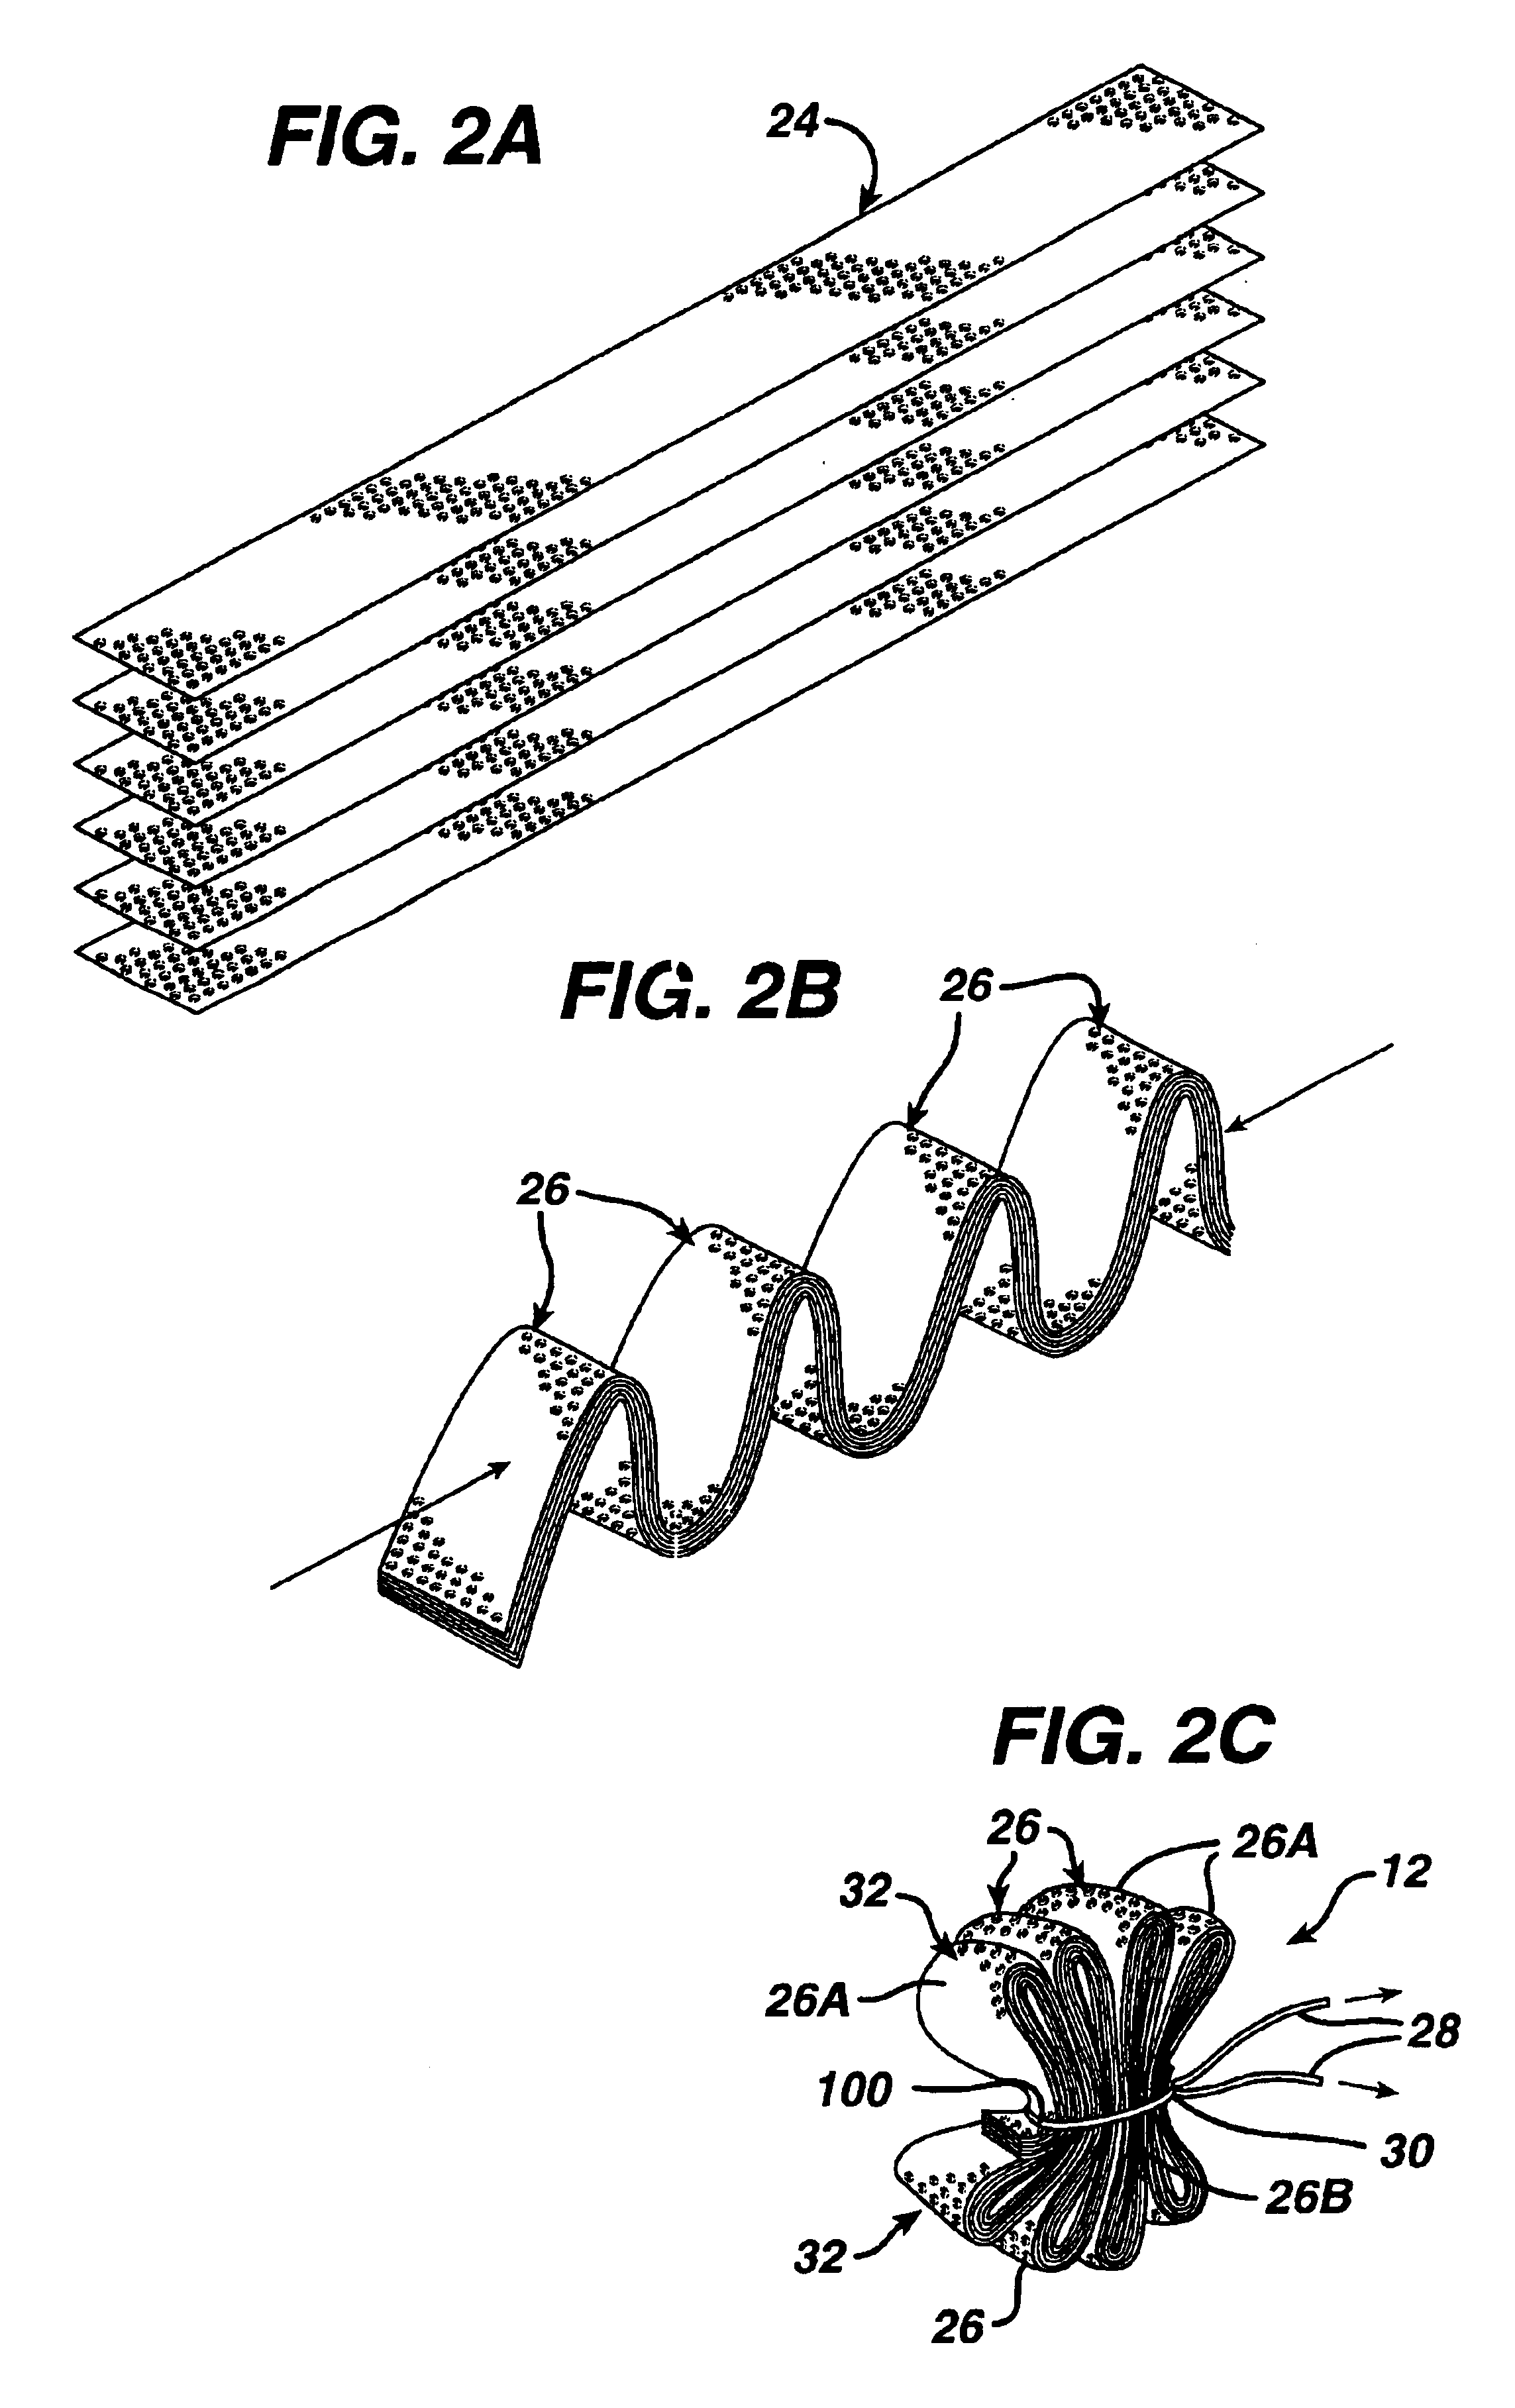 Textured film devices